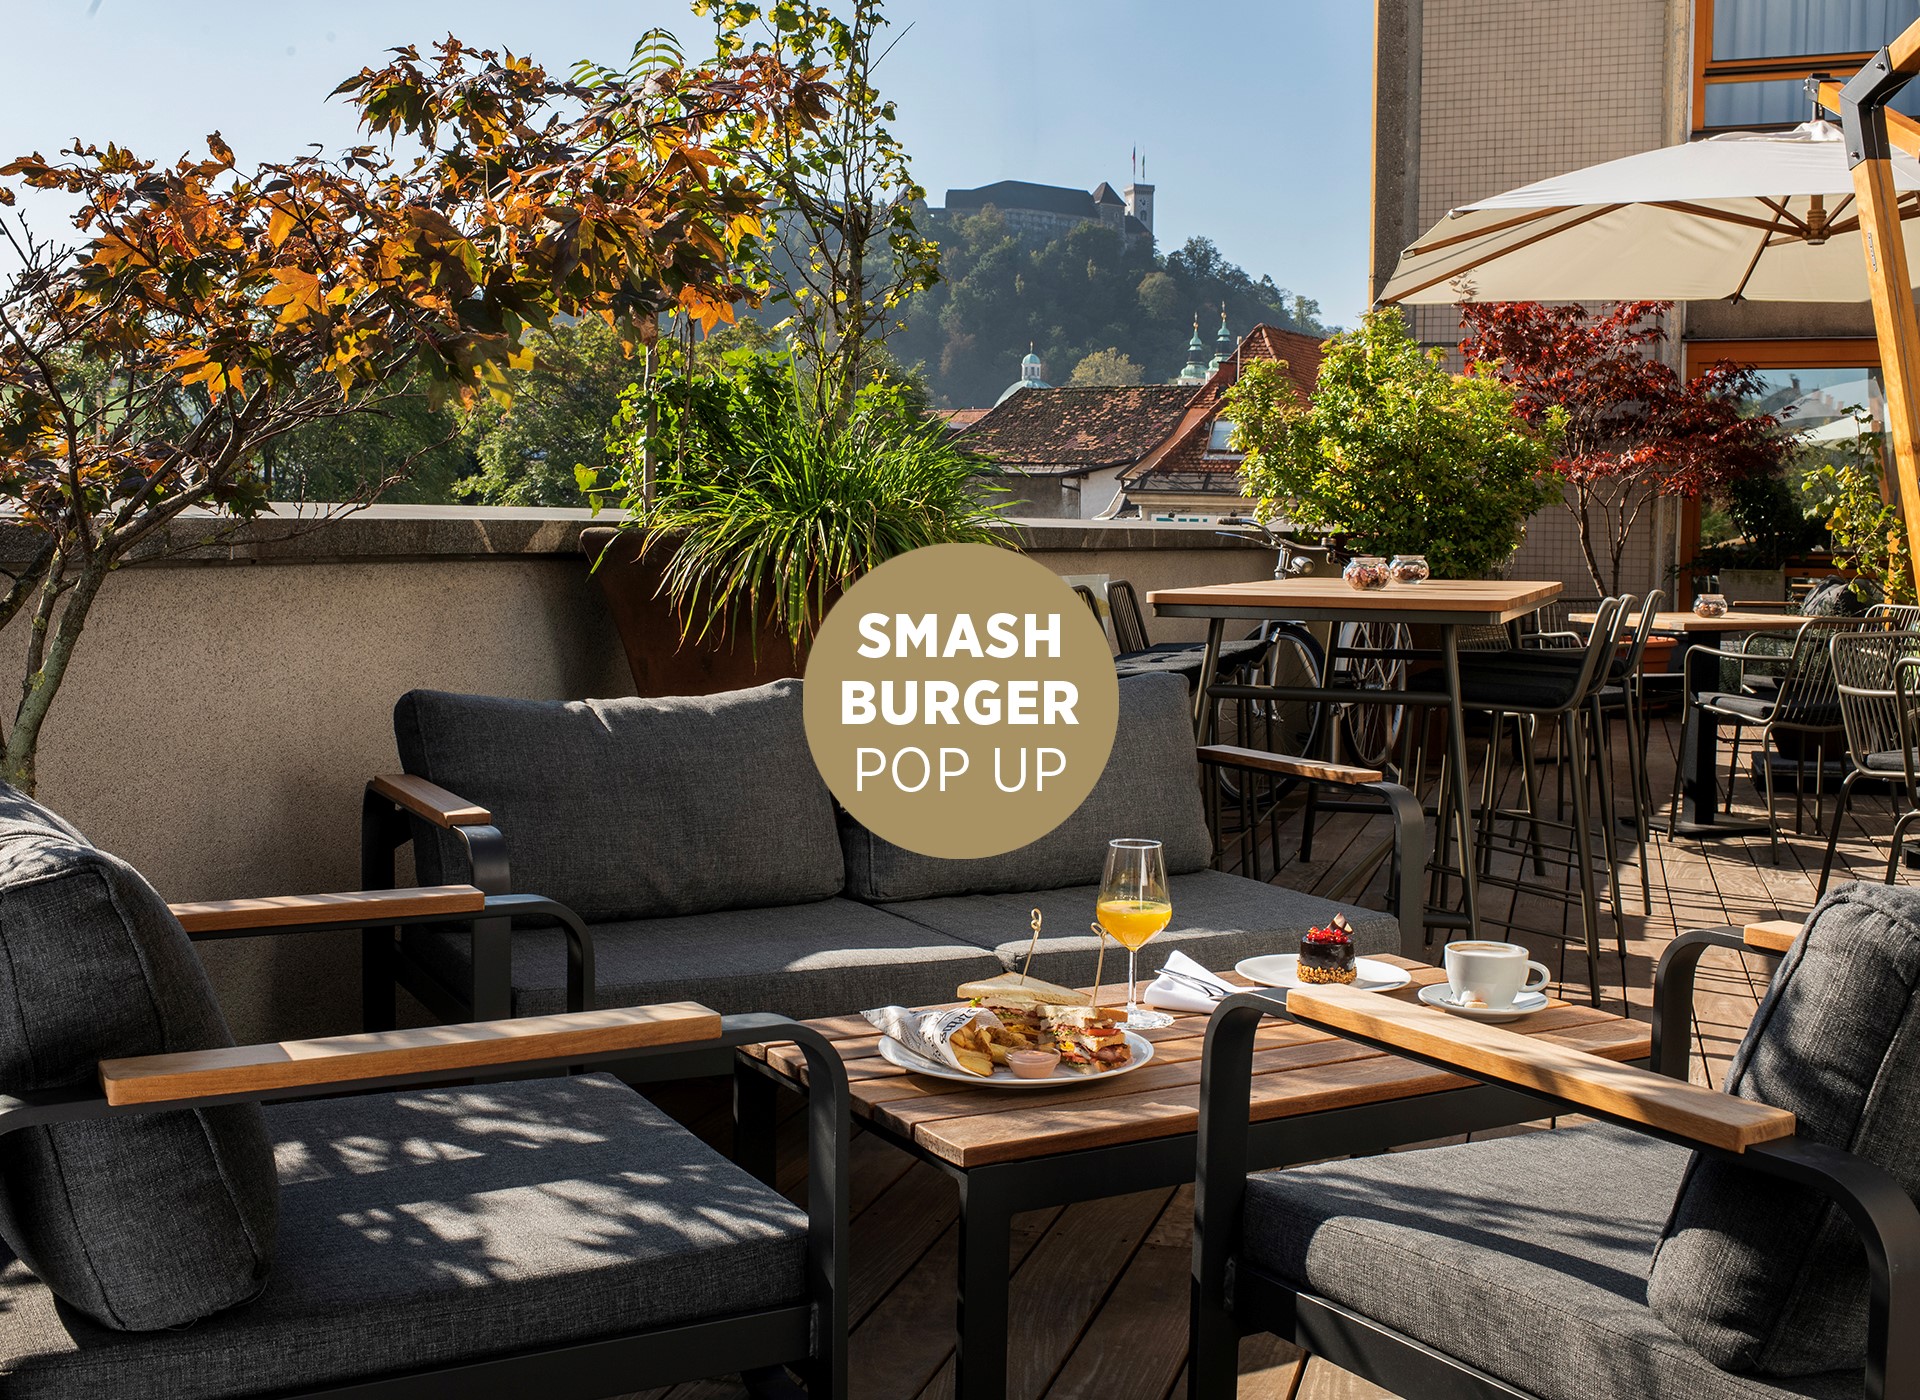 Our lush summer terrace is now home of Smash Burger pop up. Enjoy hotel breakfast or best burger in town with a stunning castle view.